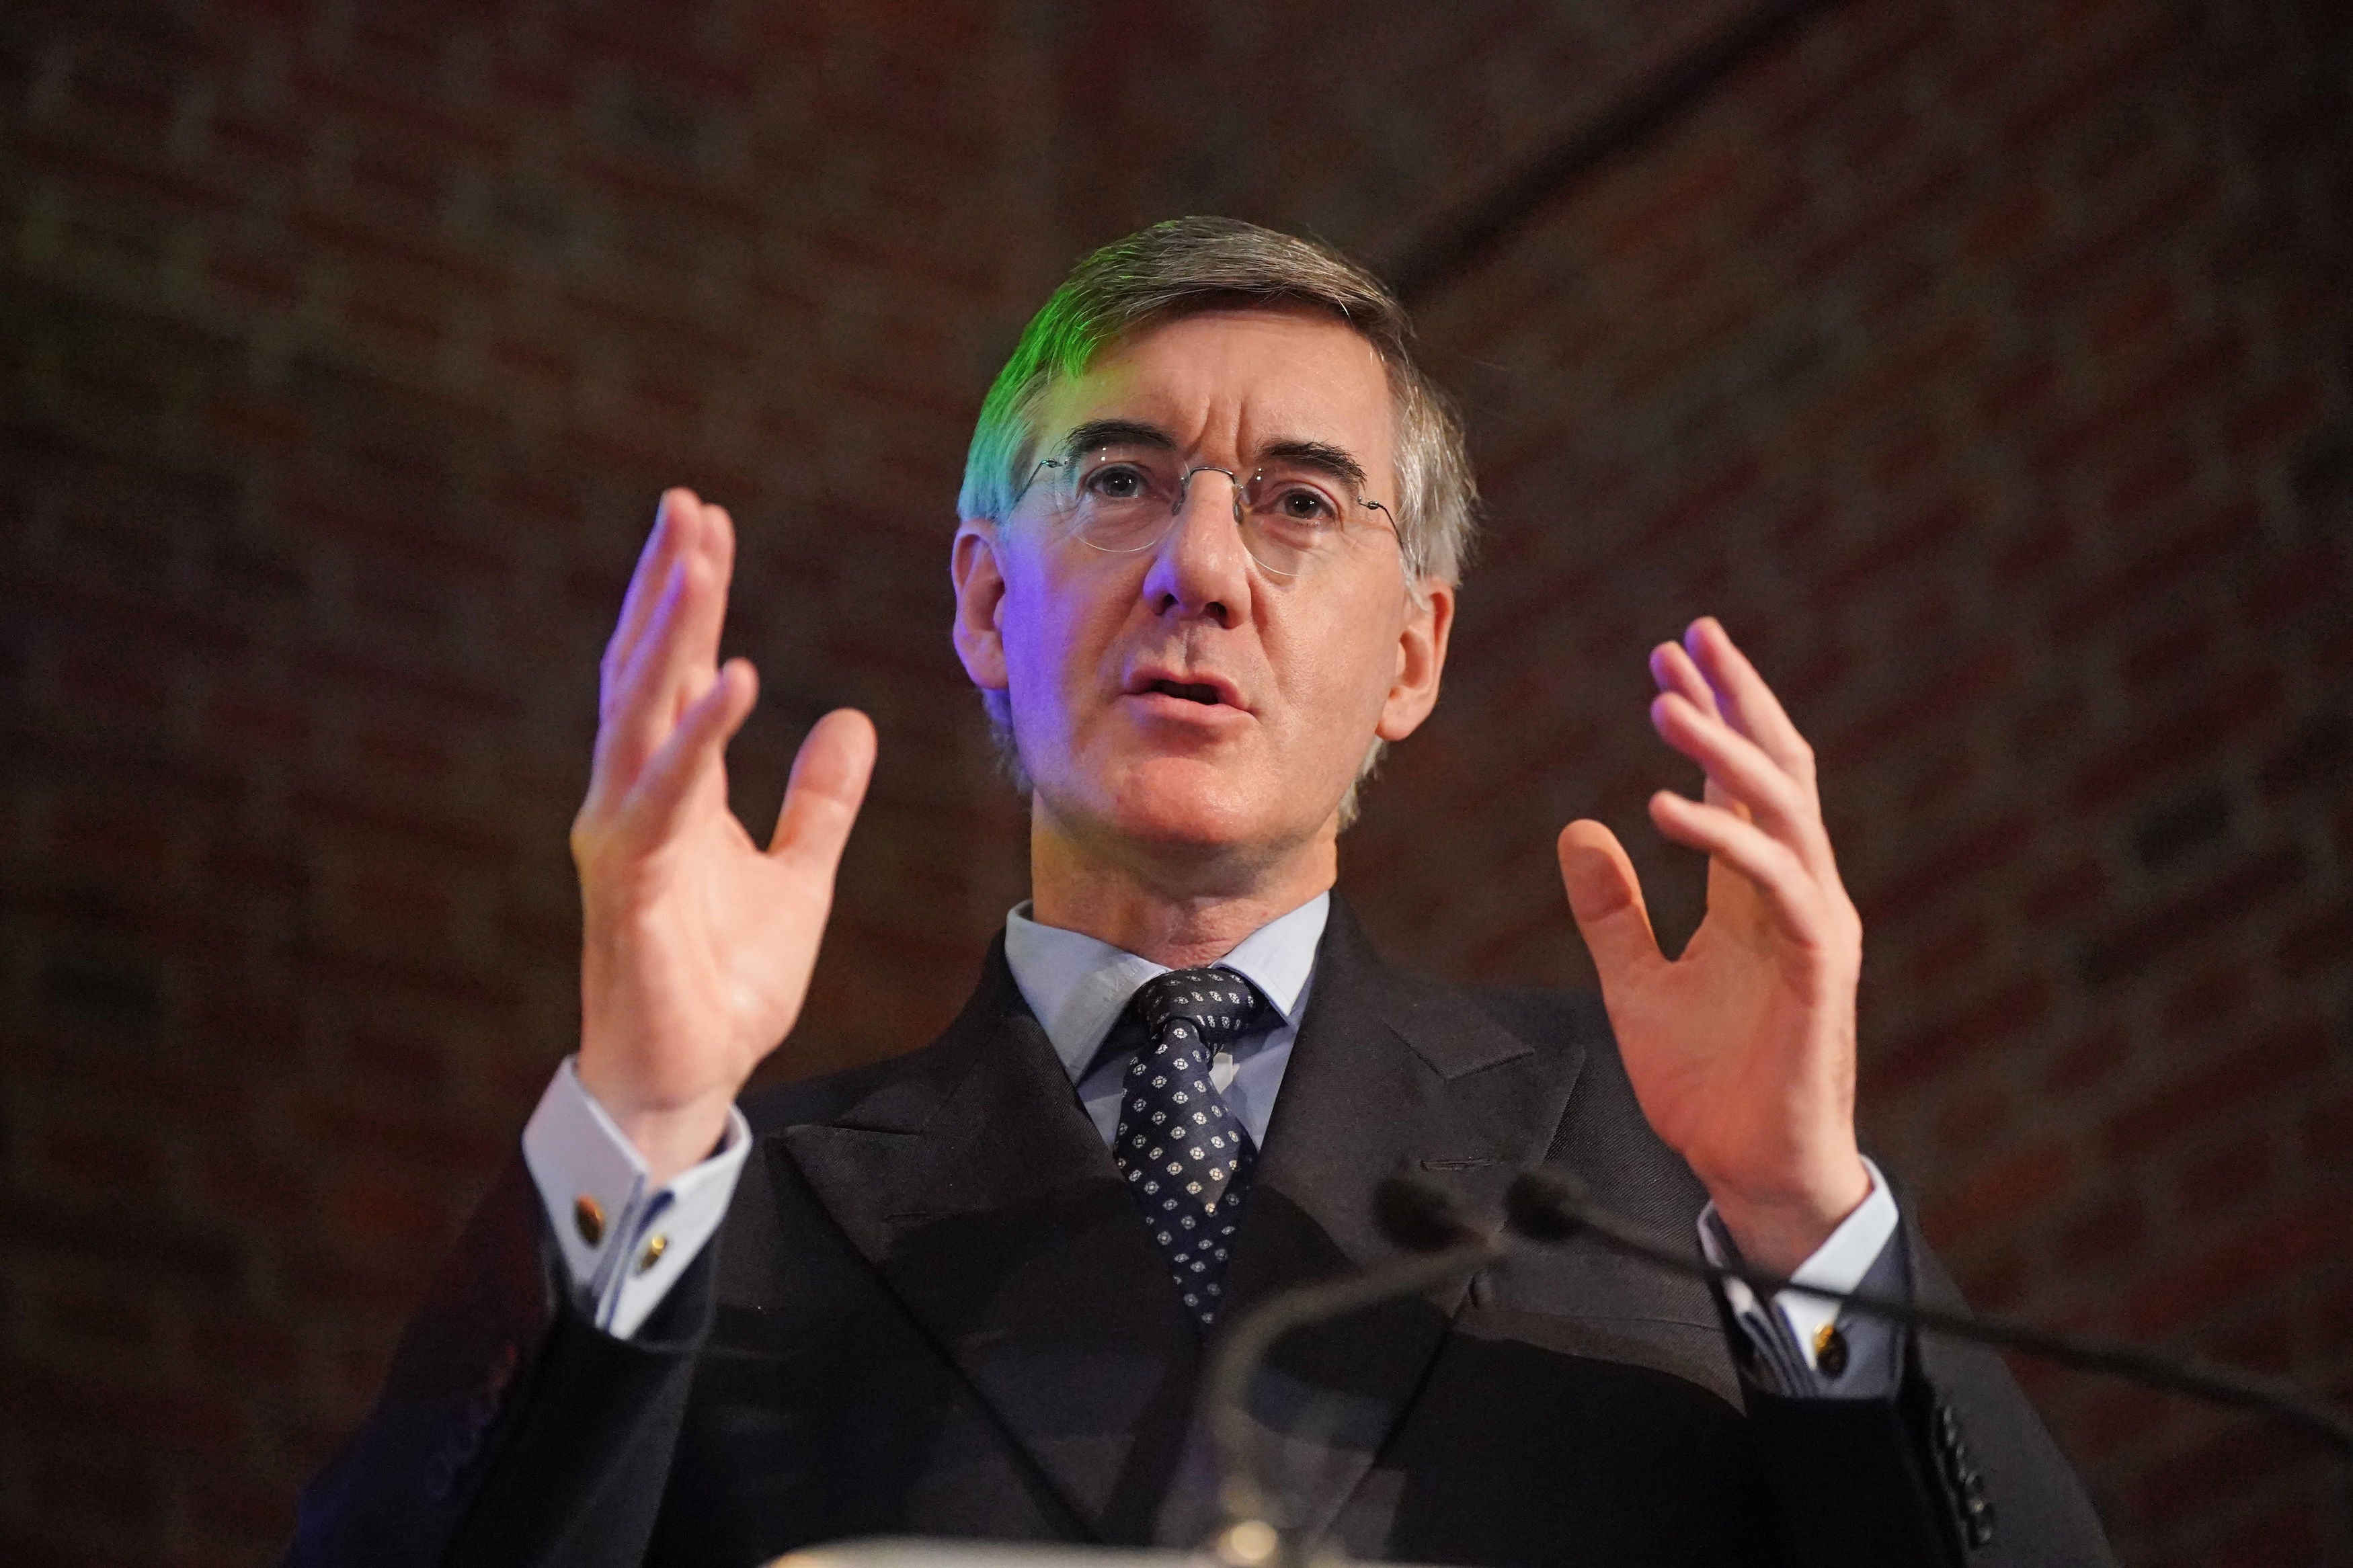 Sir Jacob Rees-Mogg criticised plans to abolish the non-dom status and to extend a windfall tax on oil and gas producers